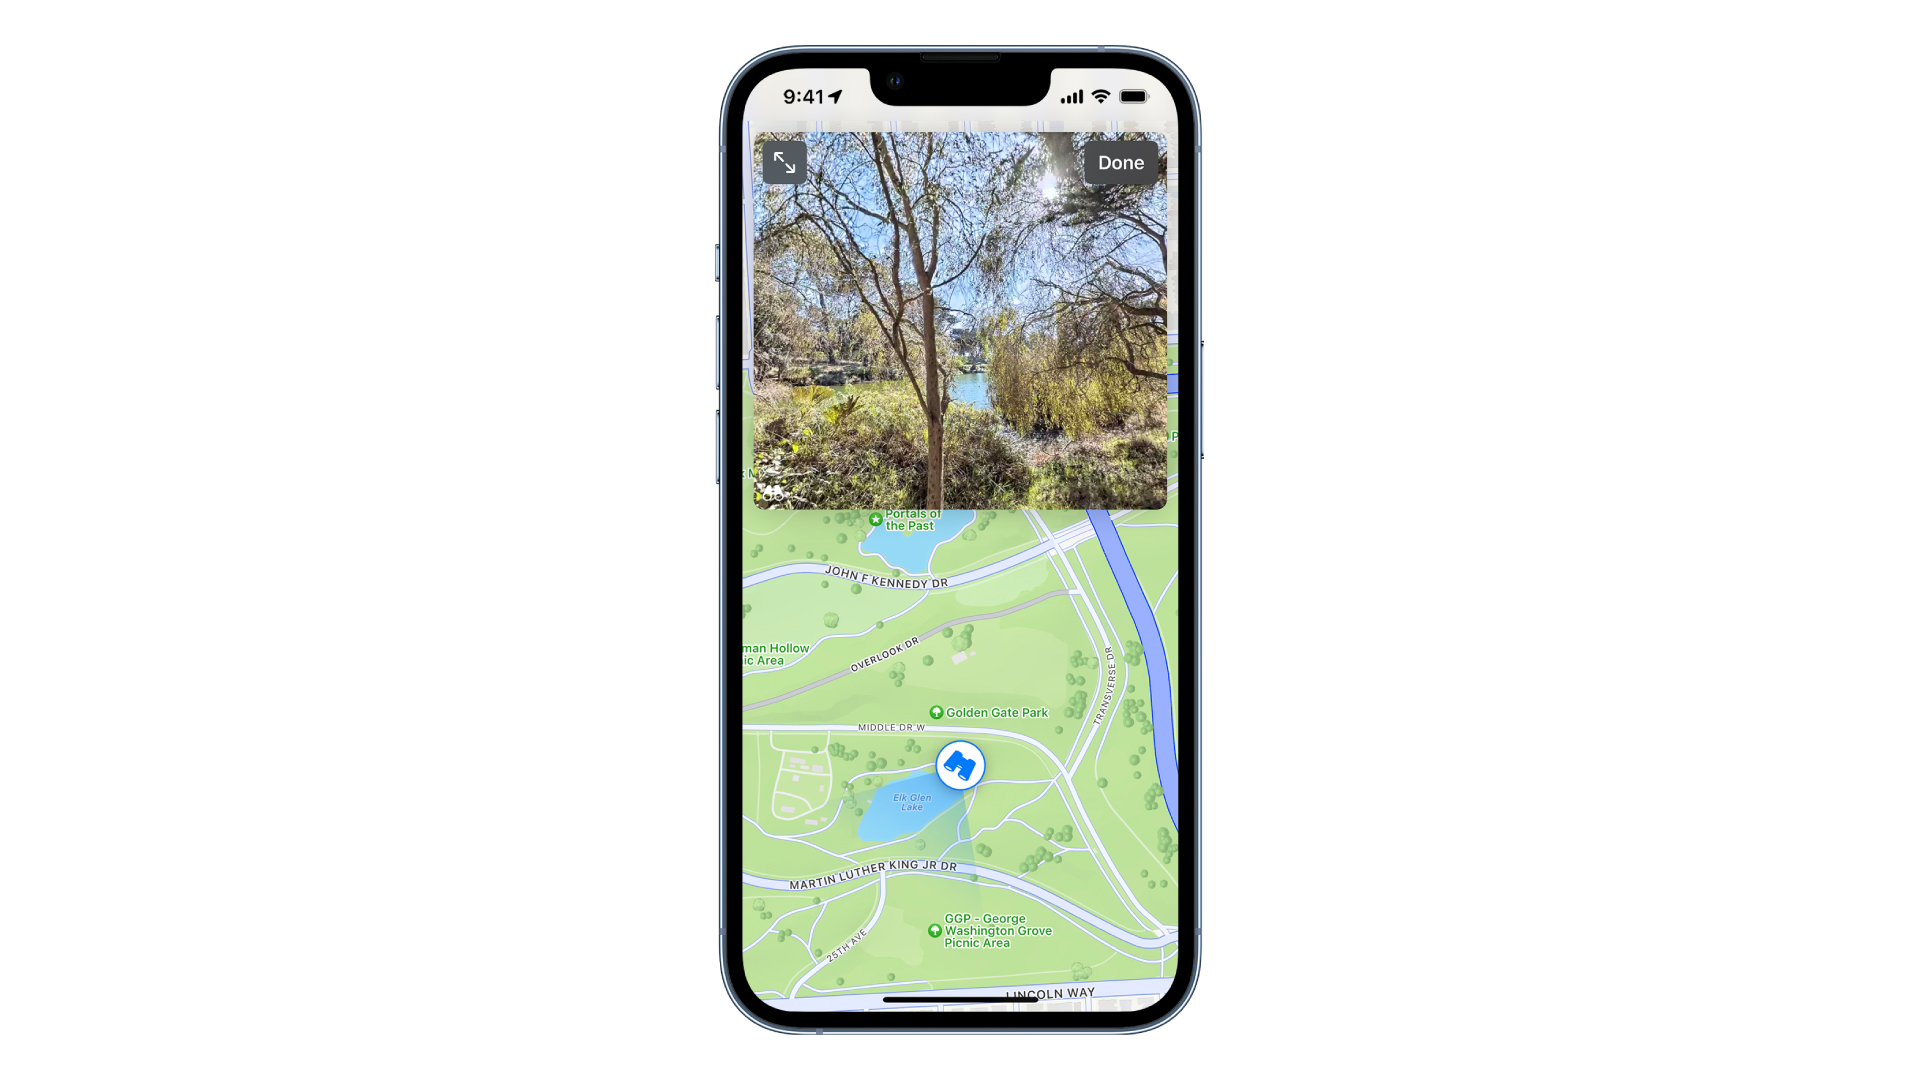 Apple Maps Look Around on an iPhone